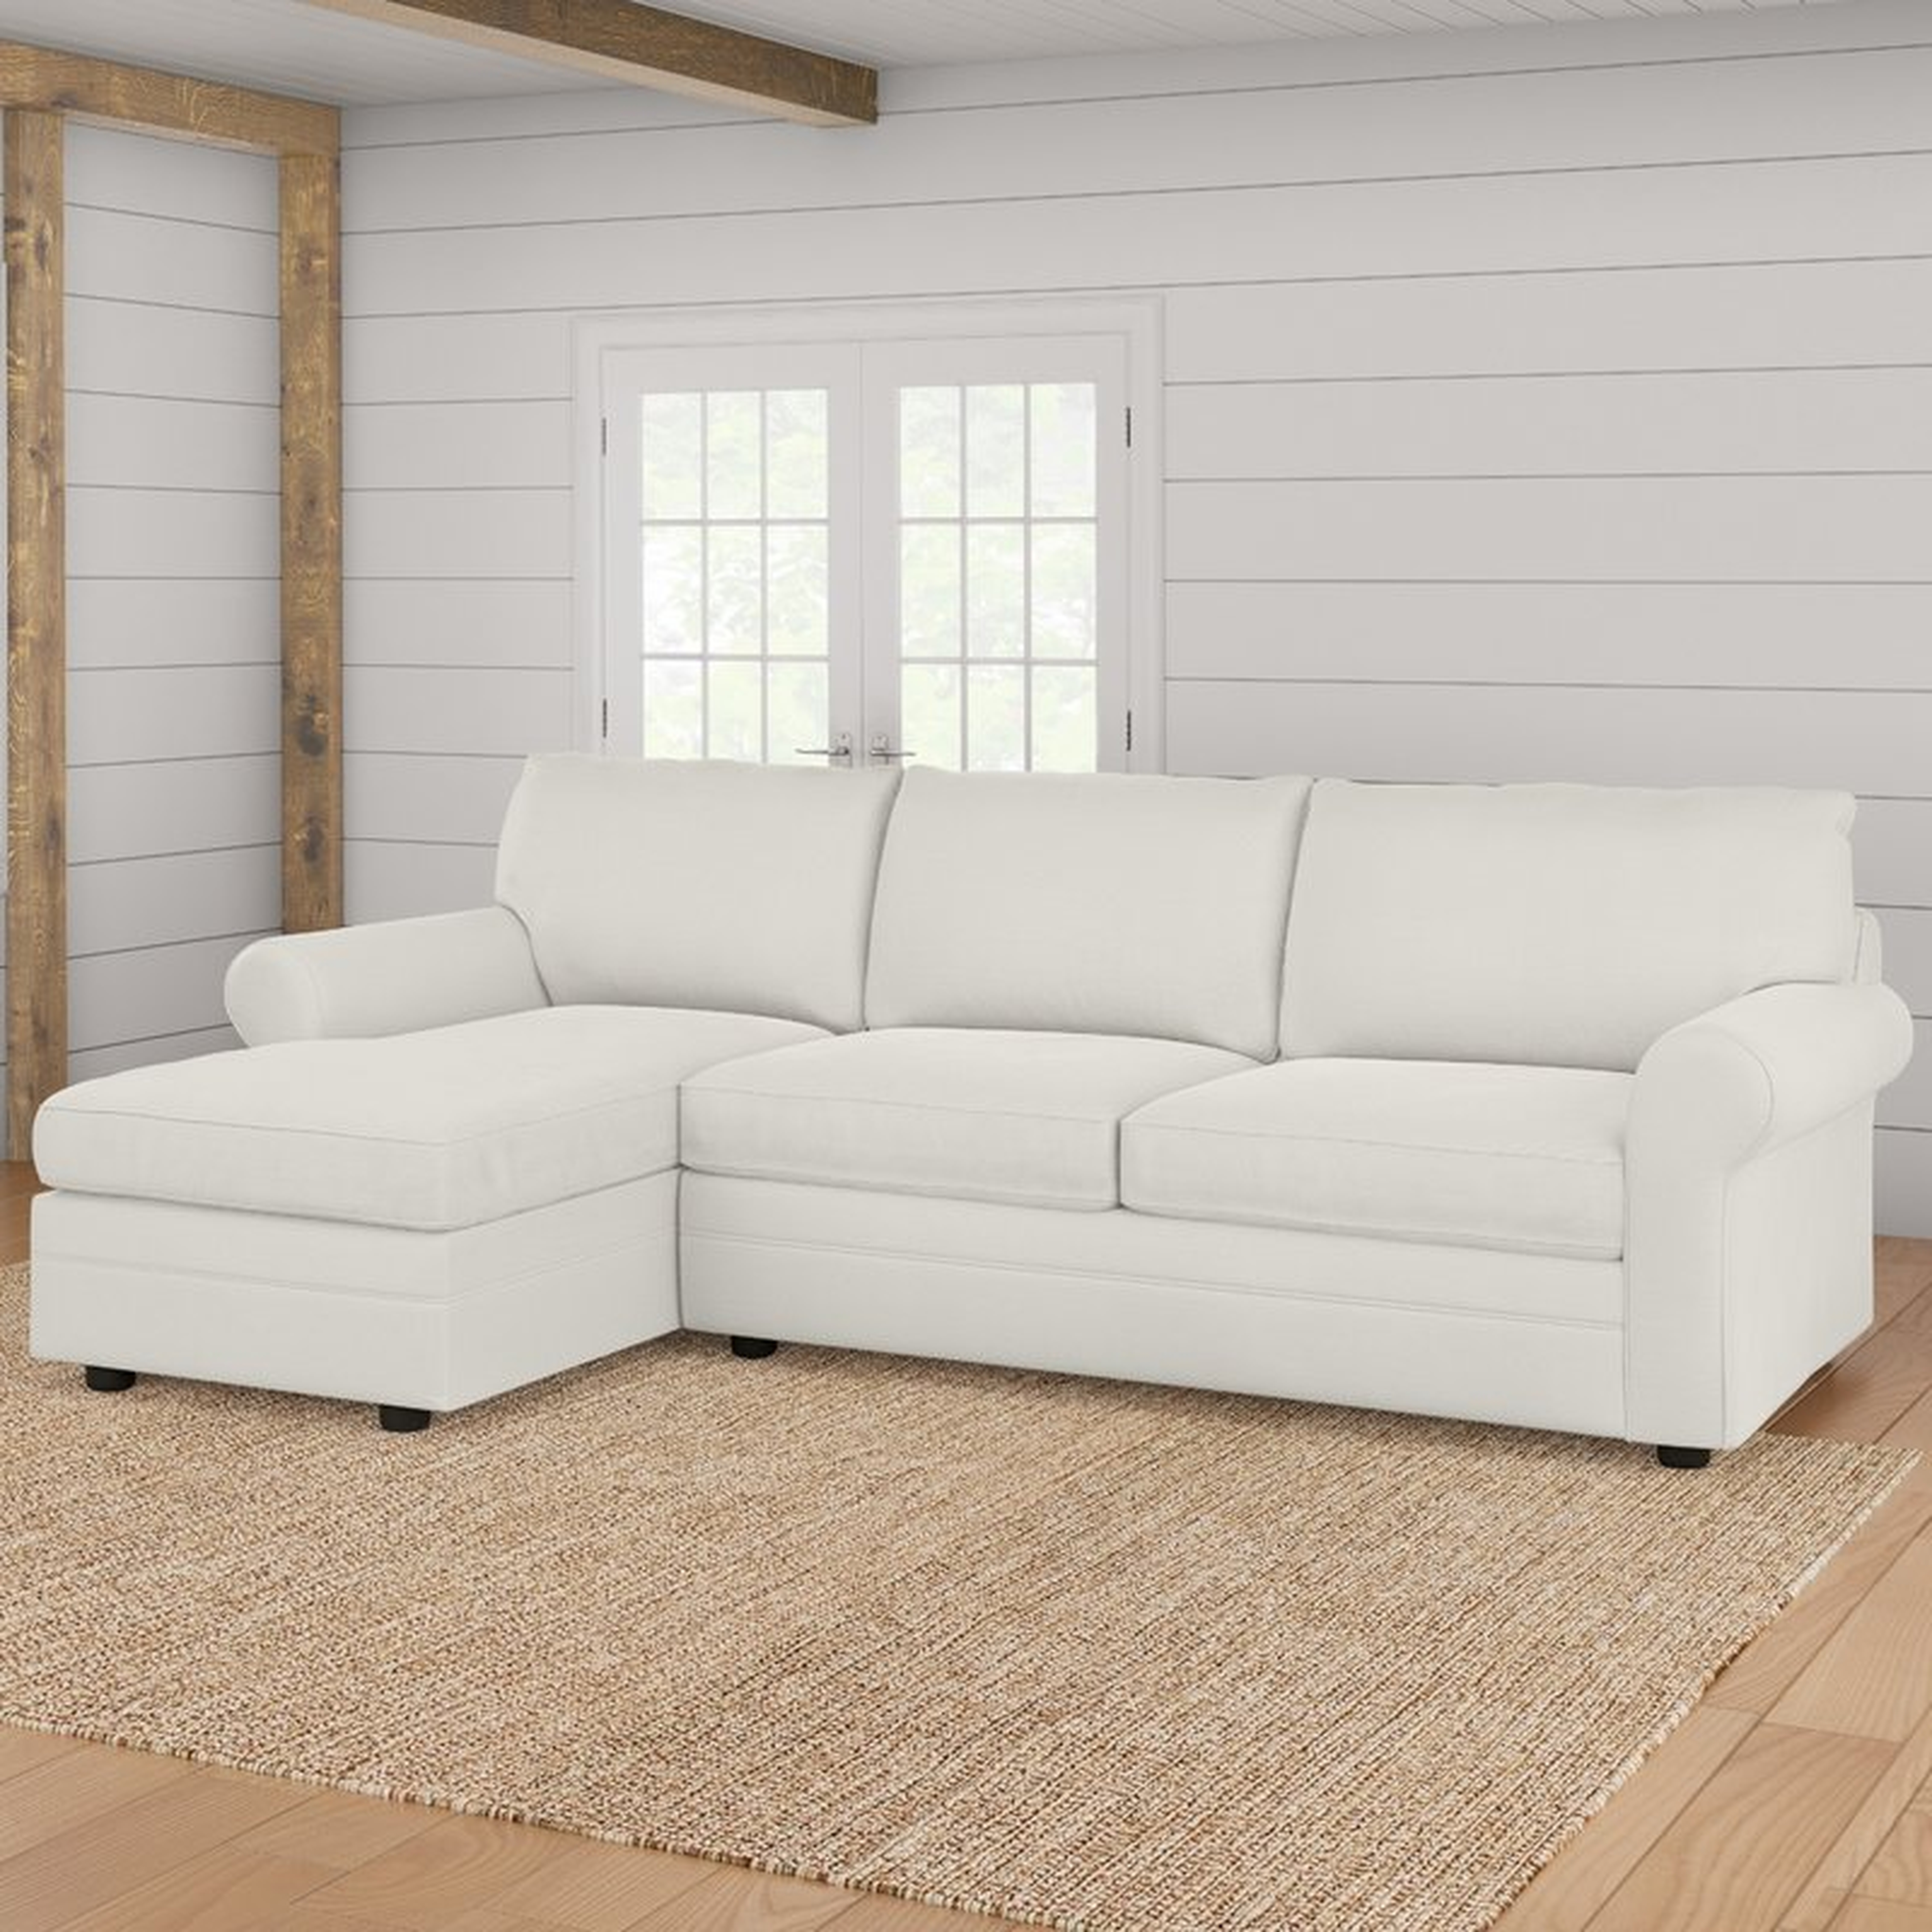 Haring Sectional, Left Hand Facing, Bevin Natural Fabric - Birch Lane